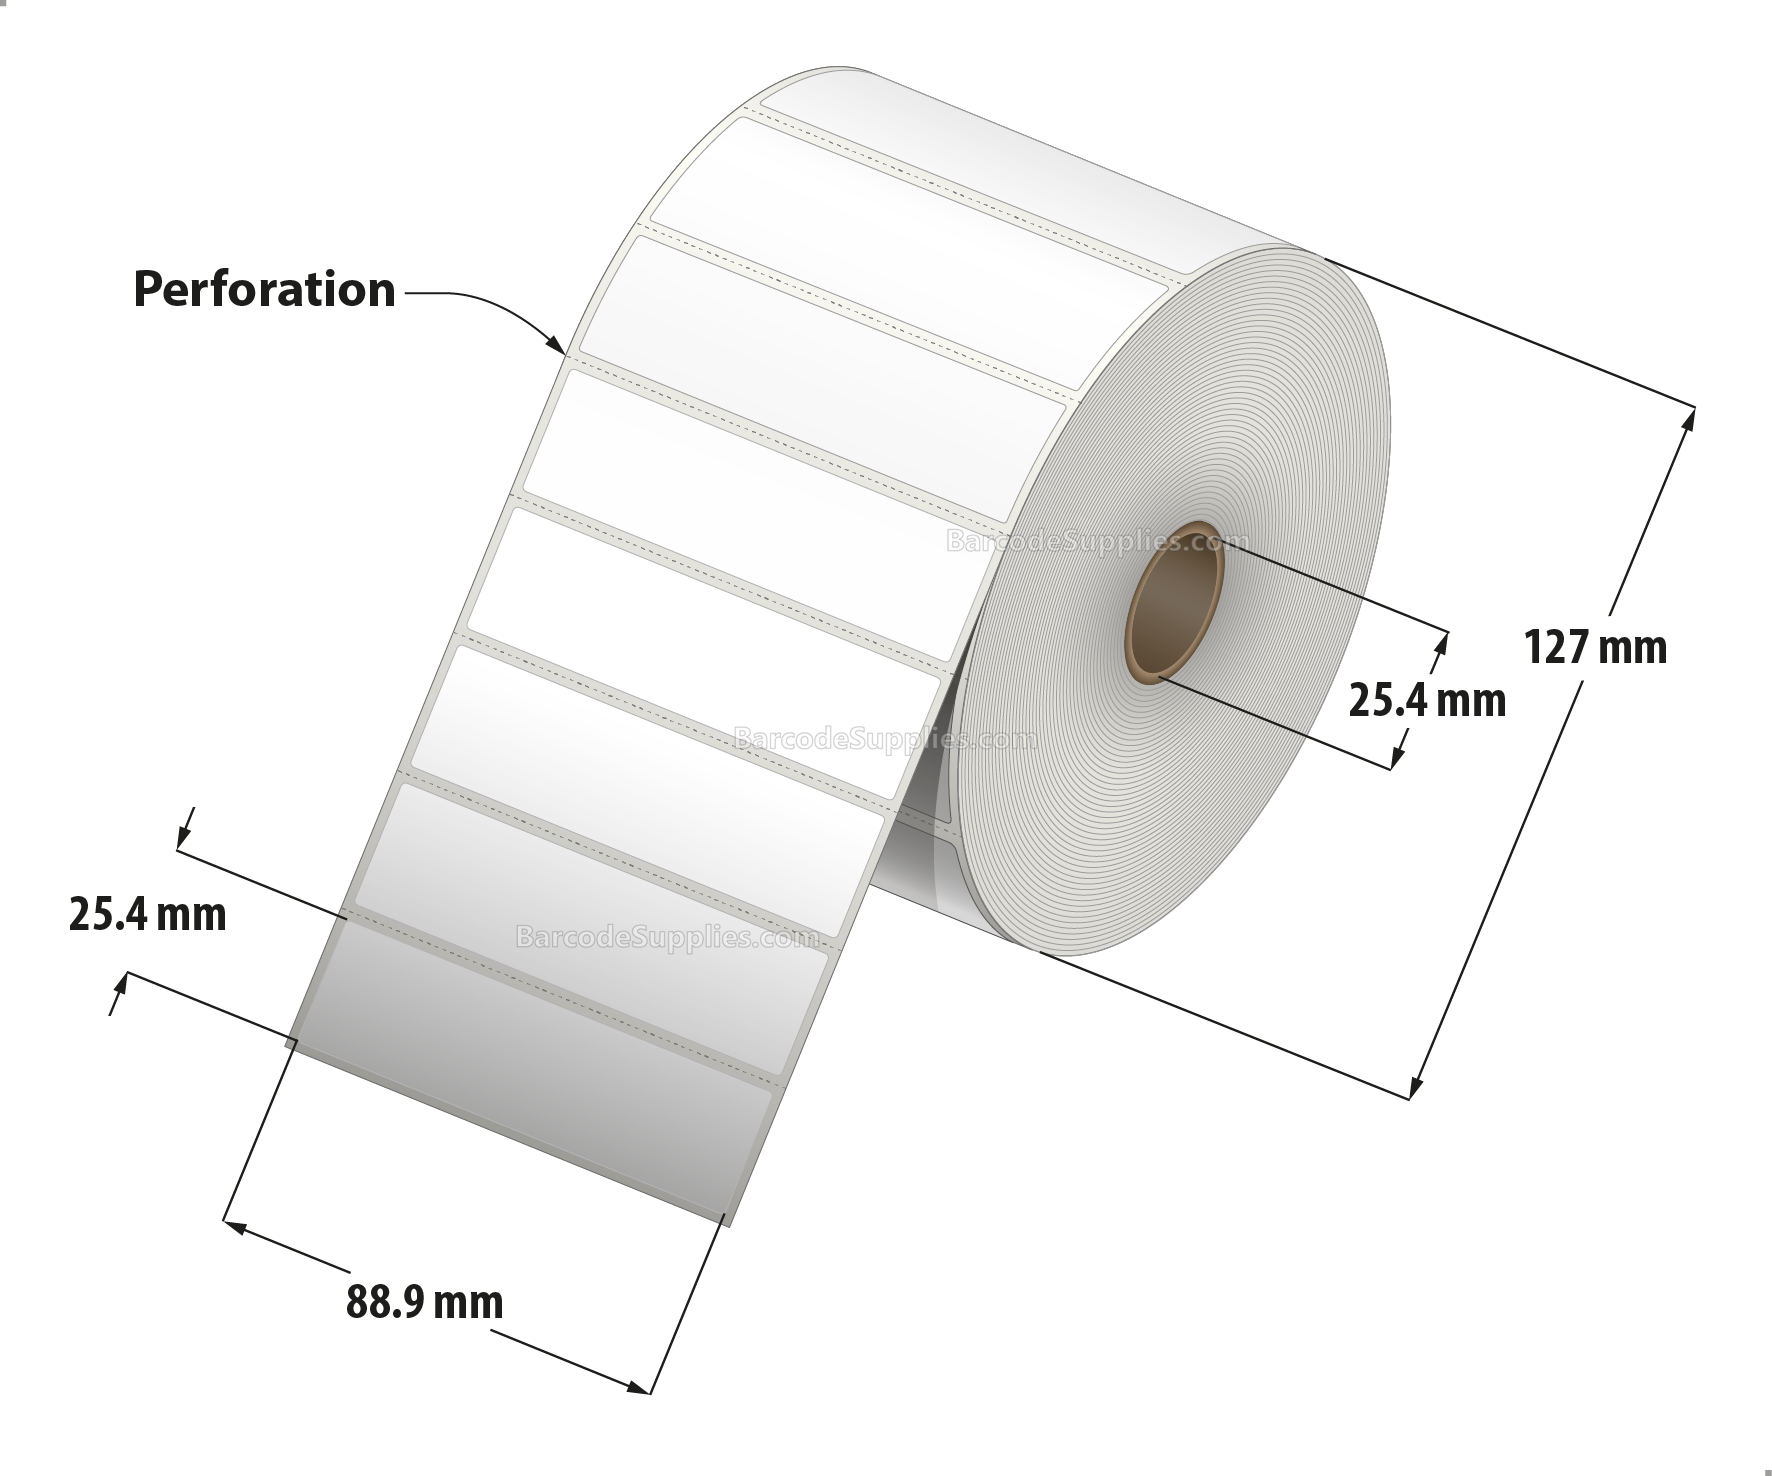 3.5 x 1 Direct Thermal White Labels With Permanent Acrylic Adhesive - Perforated - 2300 Labels Per Roll - Carton Of 4 Rolls - 9200 Labels Total - MPN: DT351-15PDT